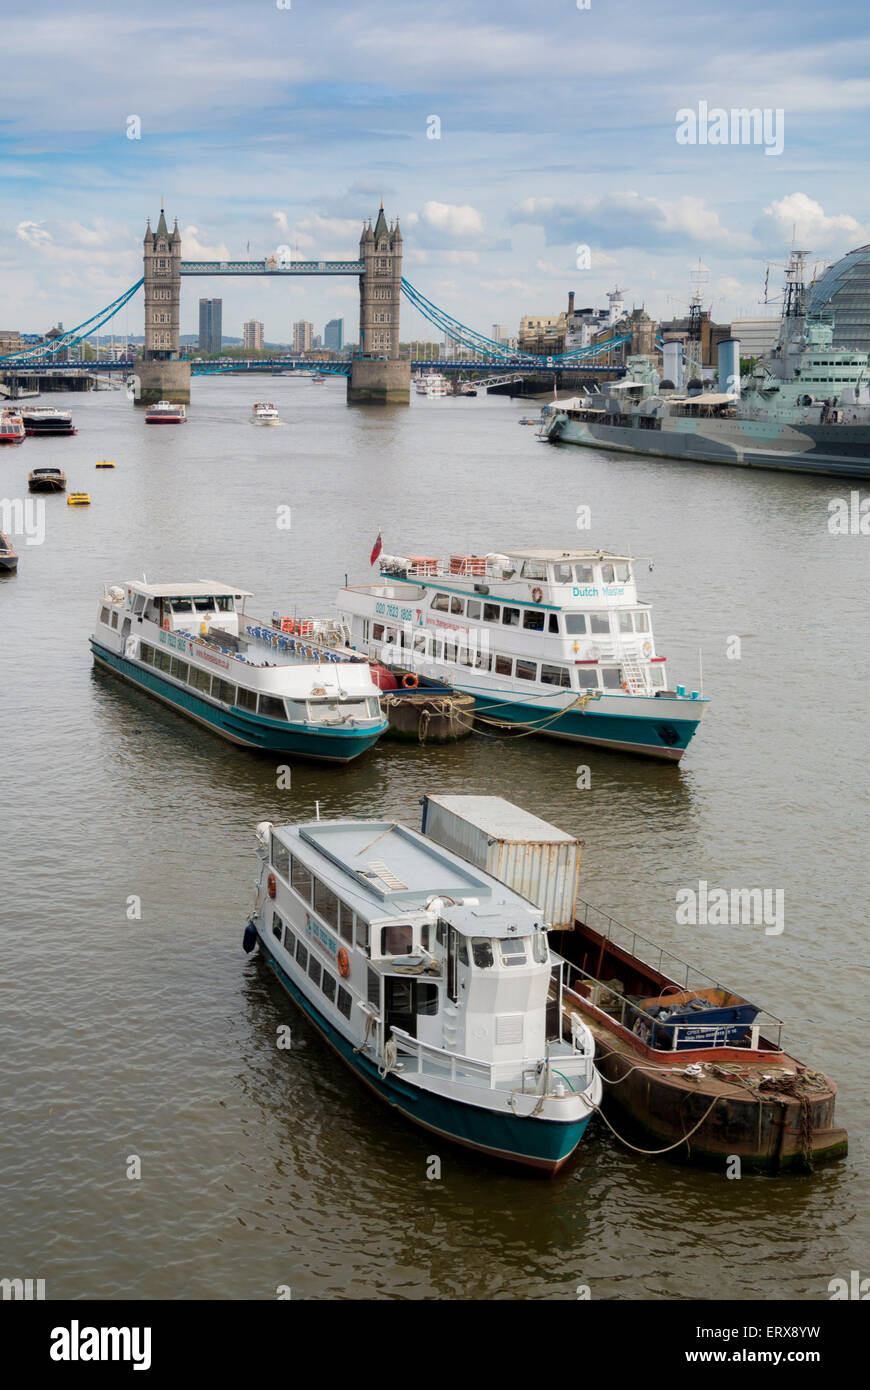 Boats on River Thames with Tower Bridge in Background, London, UK. Stock Photo